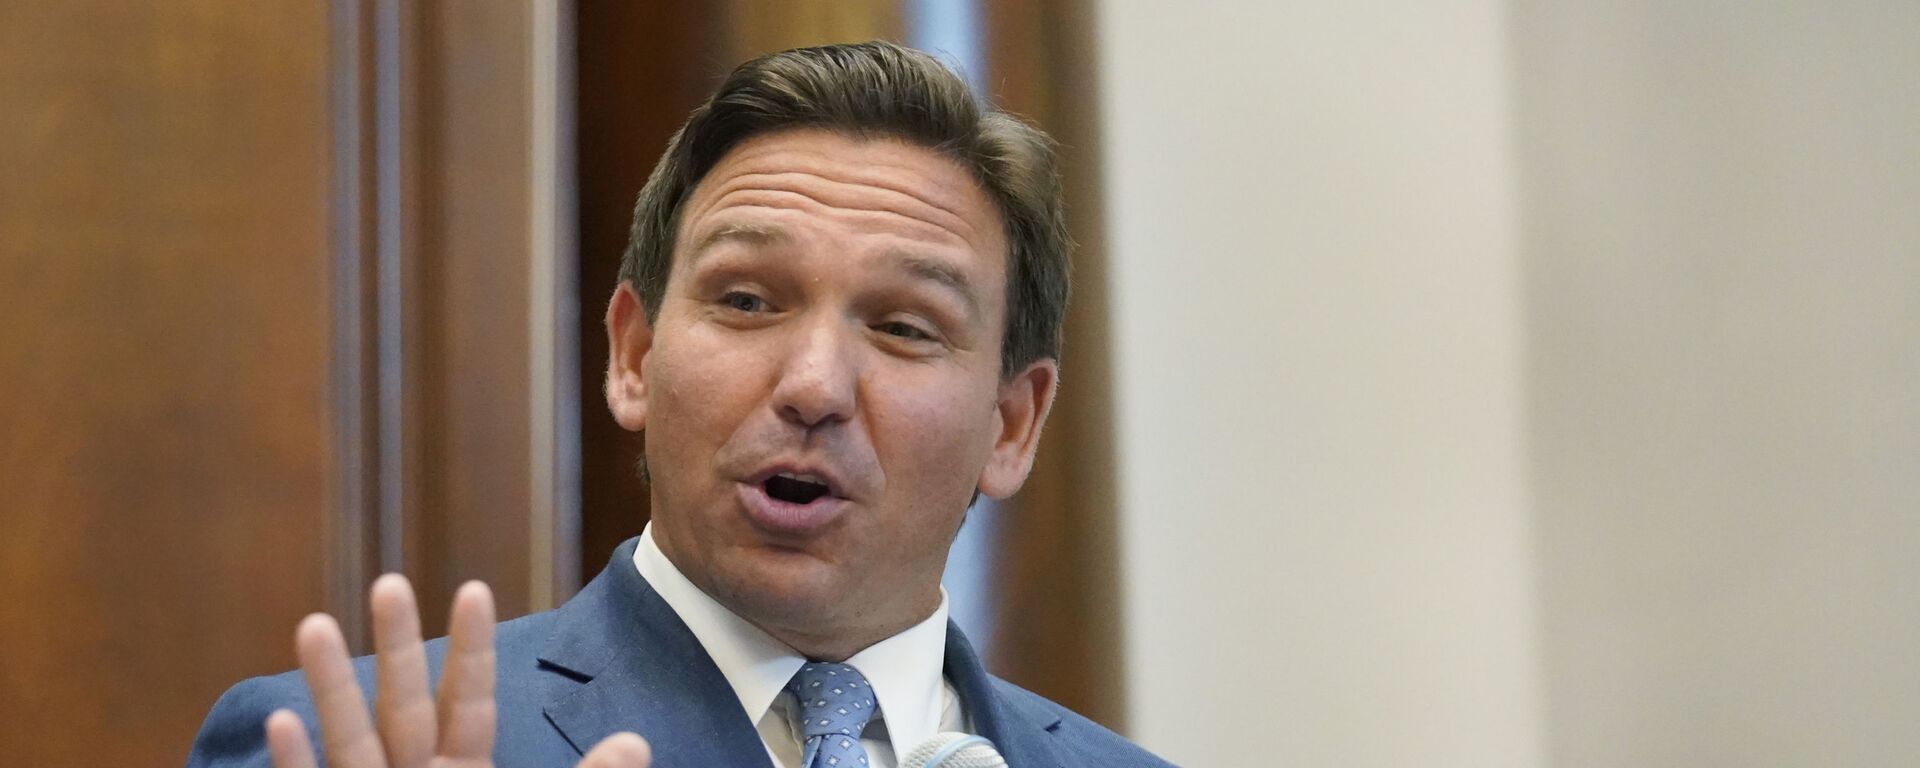 Florida Gov. Ron DeSantis gestures as he speaks, Monday, June 14, 2021, at the Shul of Bal Harbour, a Jewish community center in Surfside, Fla. DeSantis visited the South Florida temple to denounce anti-Semitism and stand with Israel, while signing a bill into law that would require public schools in his state to set aside moments of silence for children to meditate or pray - Sputnik International, 1920, 04.01.2022